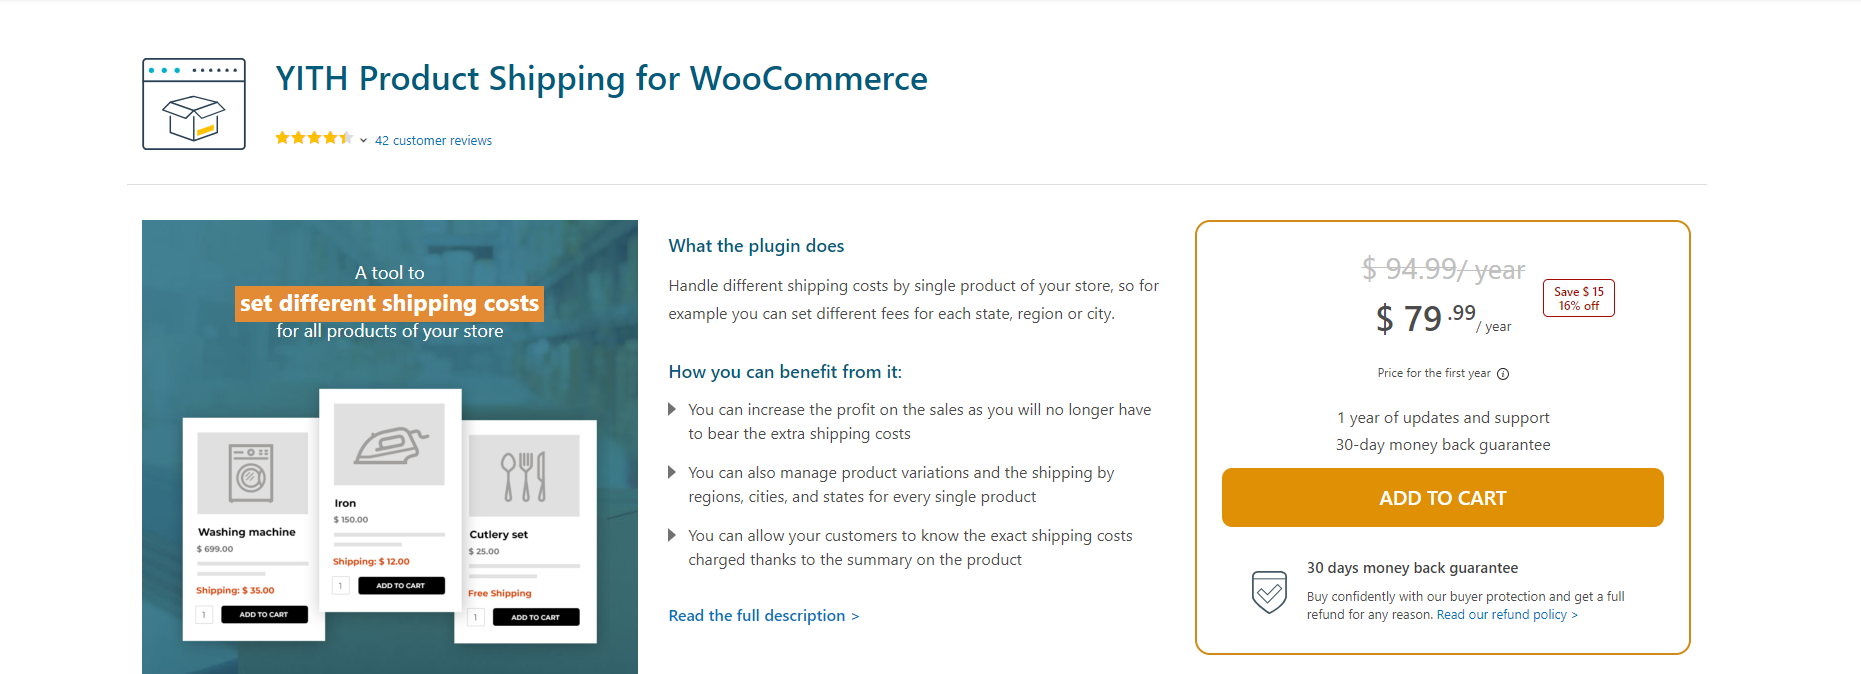 YITH Product Shipping for WooCommerce